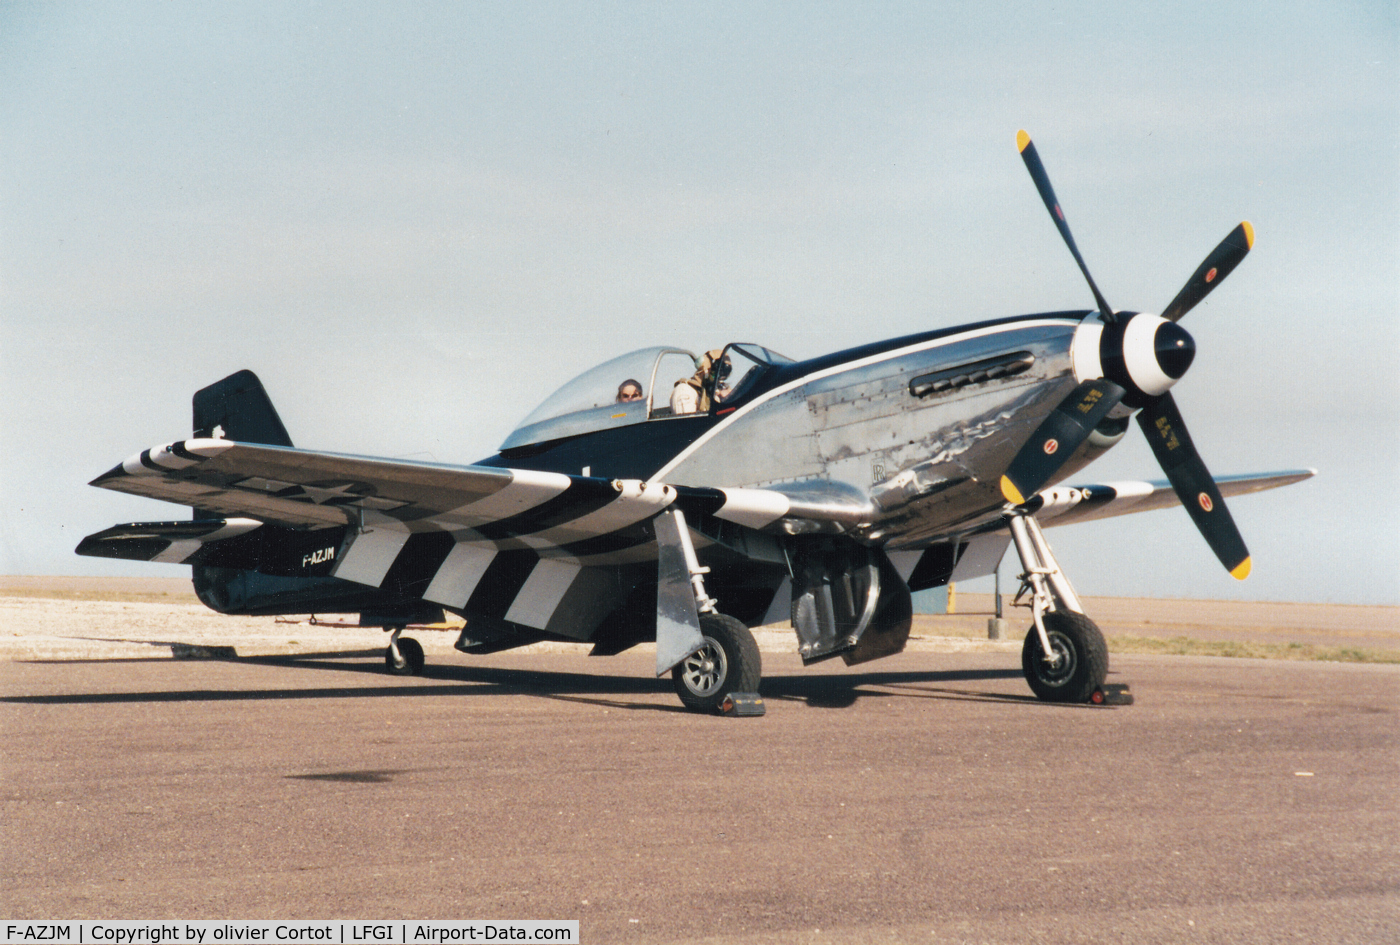 F-AZJM, 1944 North American P-51D Mustang C/N 122-39486, Darois airfield 1997